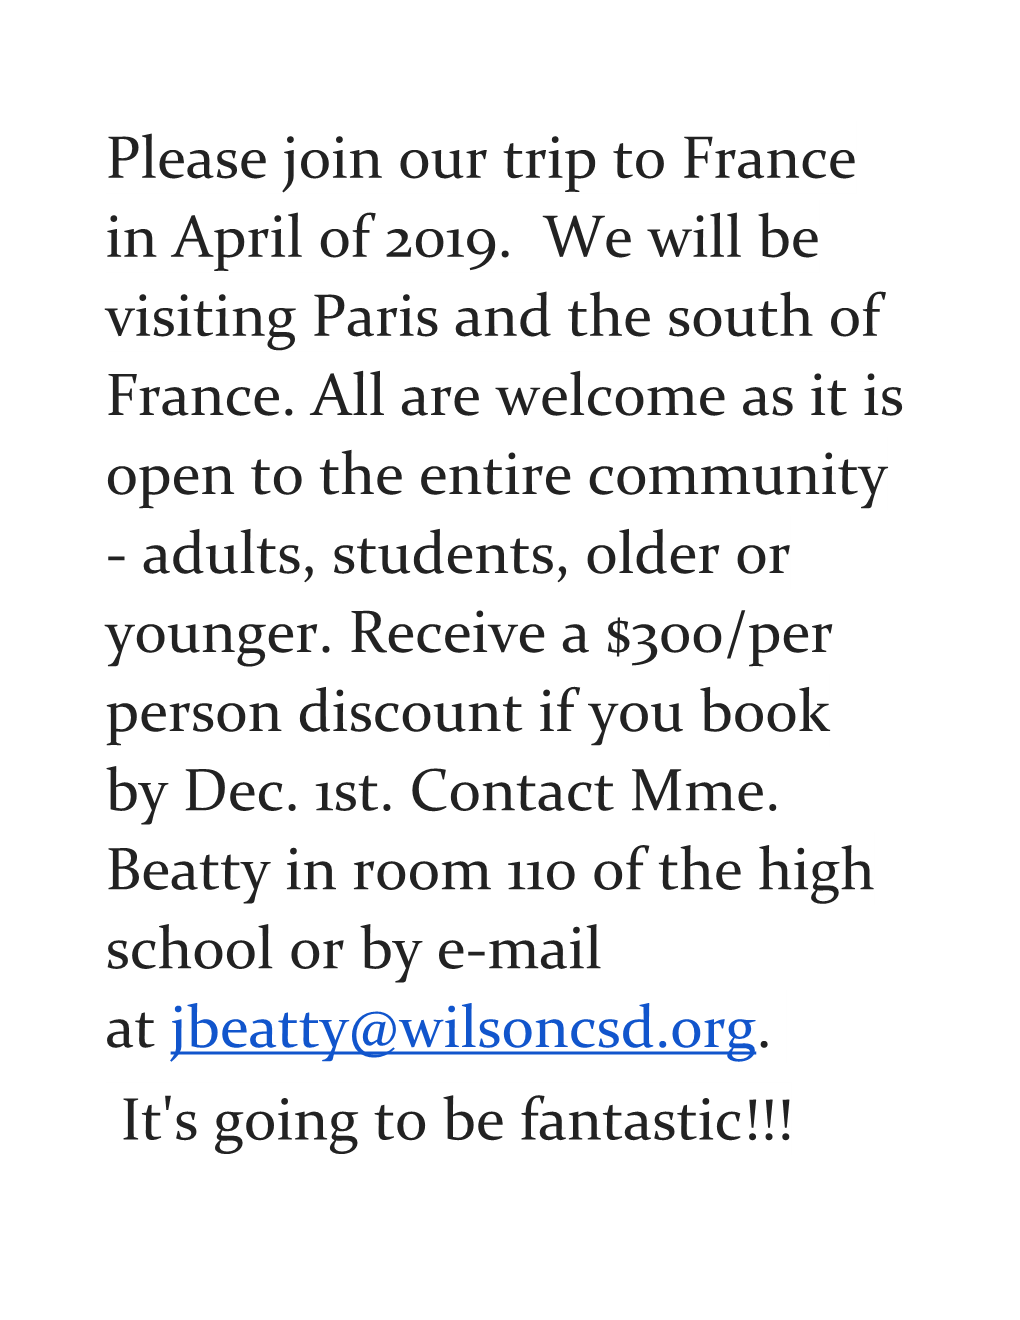 Please Join Our Trip to France in April of 2019. We Will Be Visiting Paris and the South of France